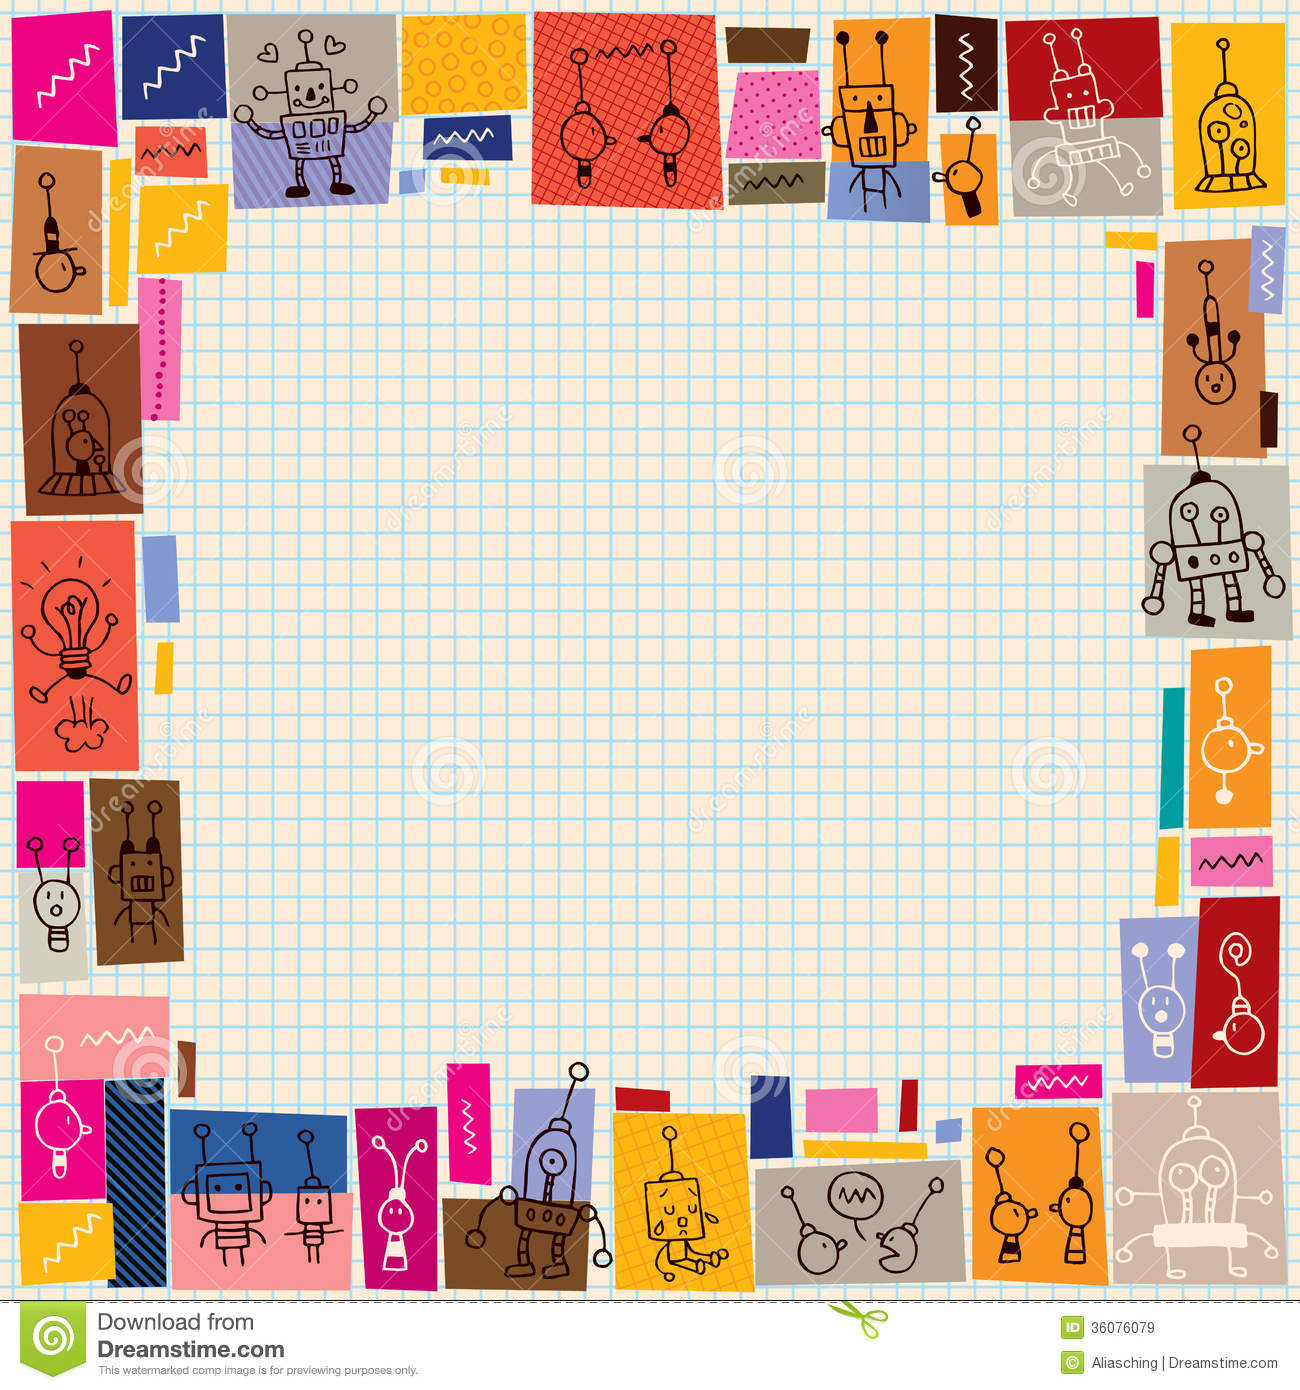 Cute Robots Collage Doodle Border Royalty Free Stock Images   Image    